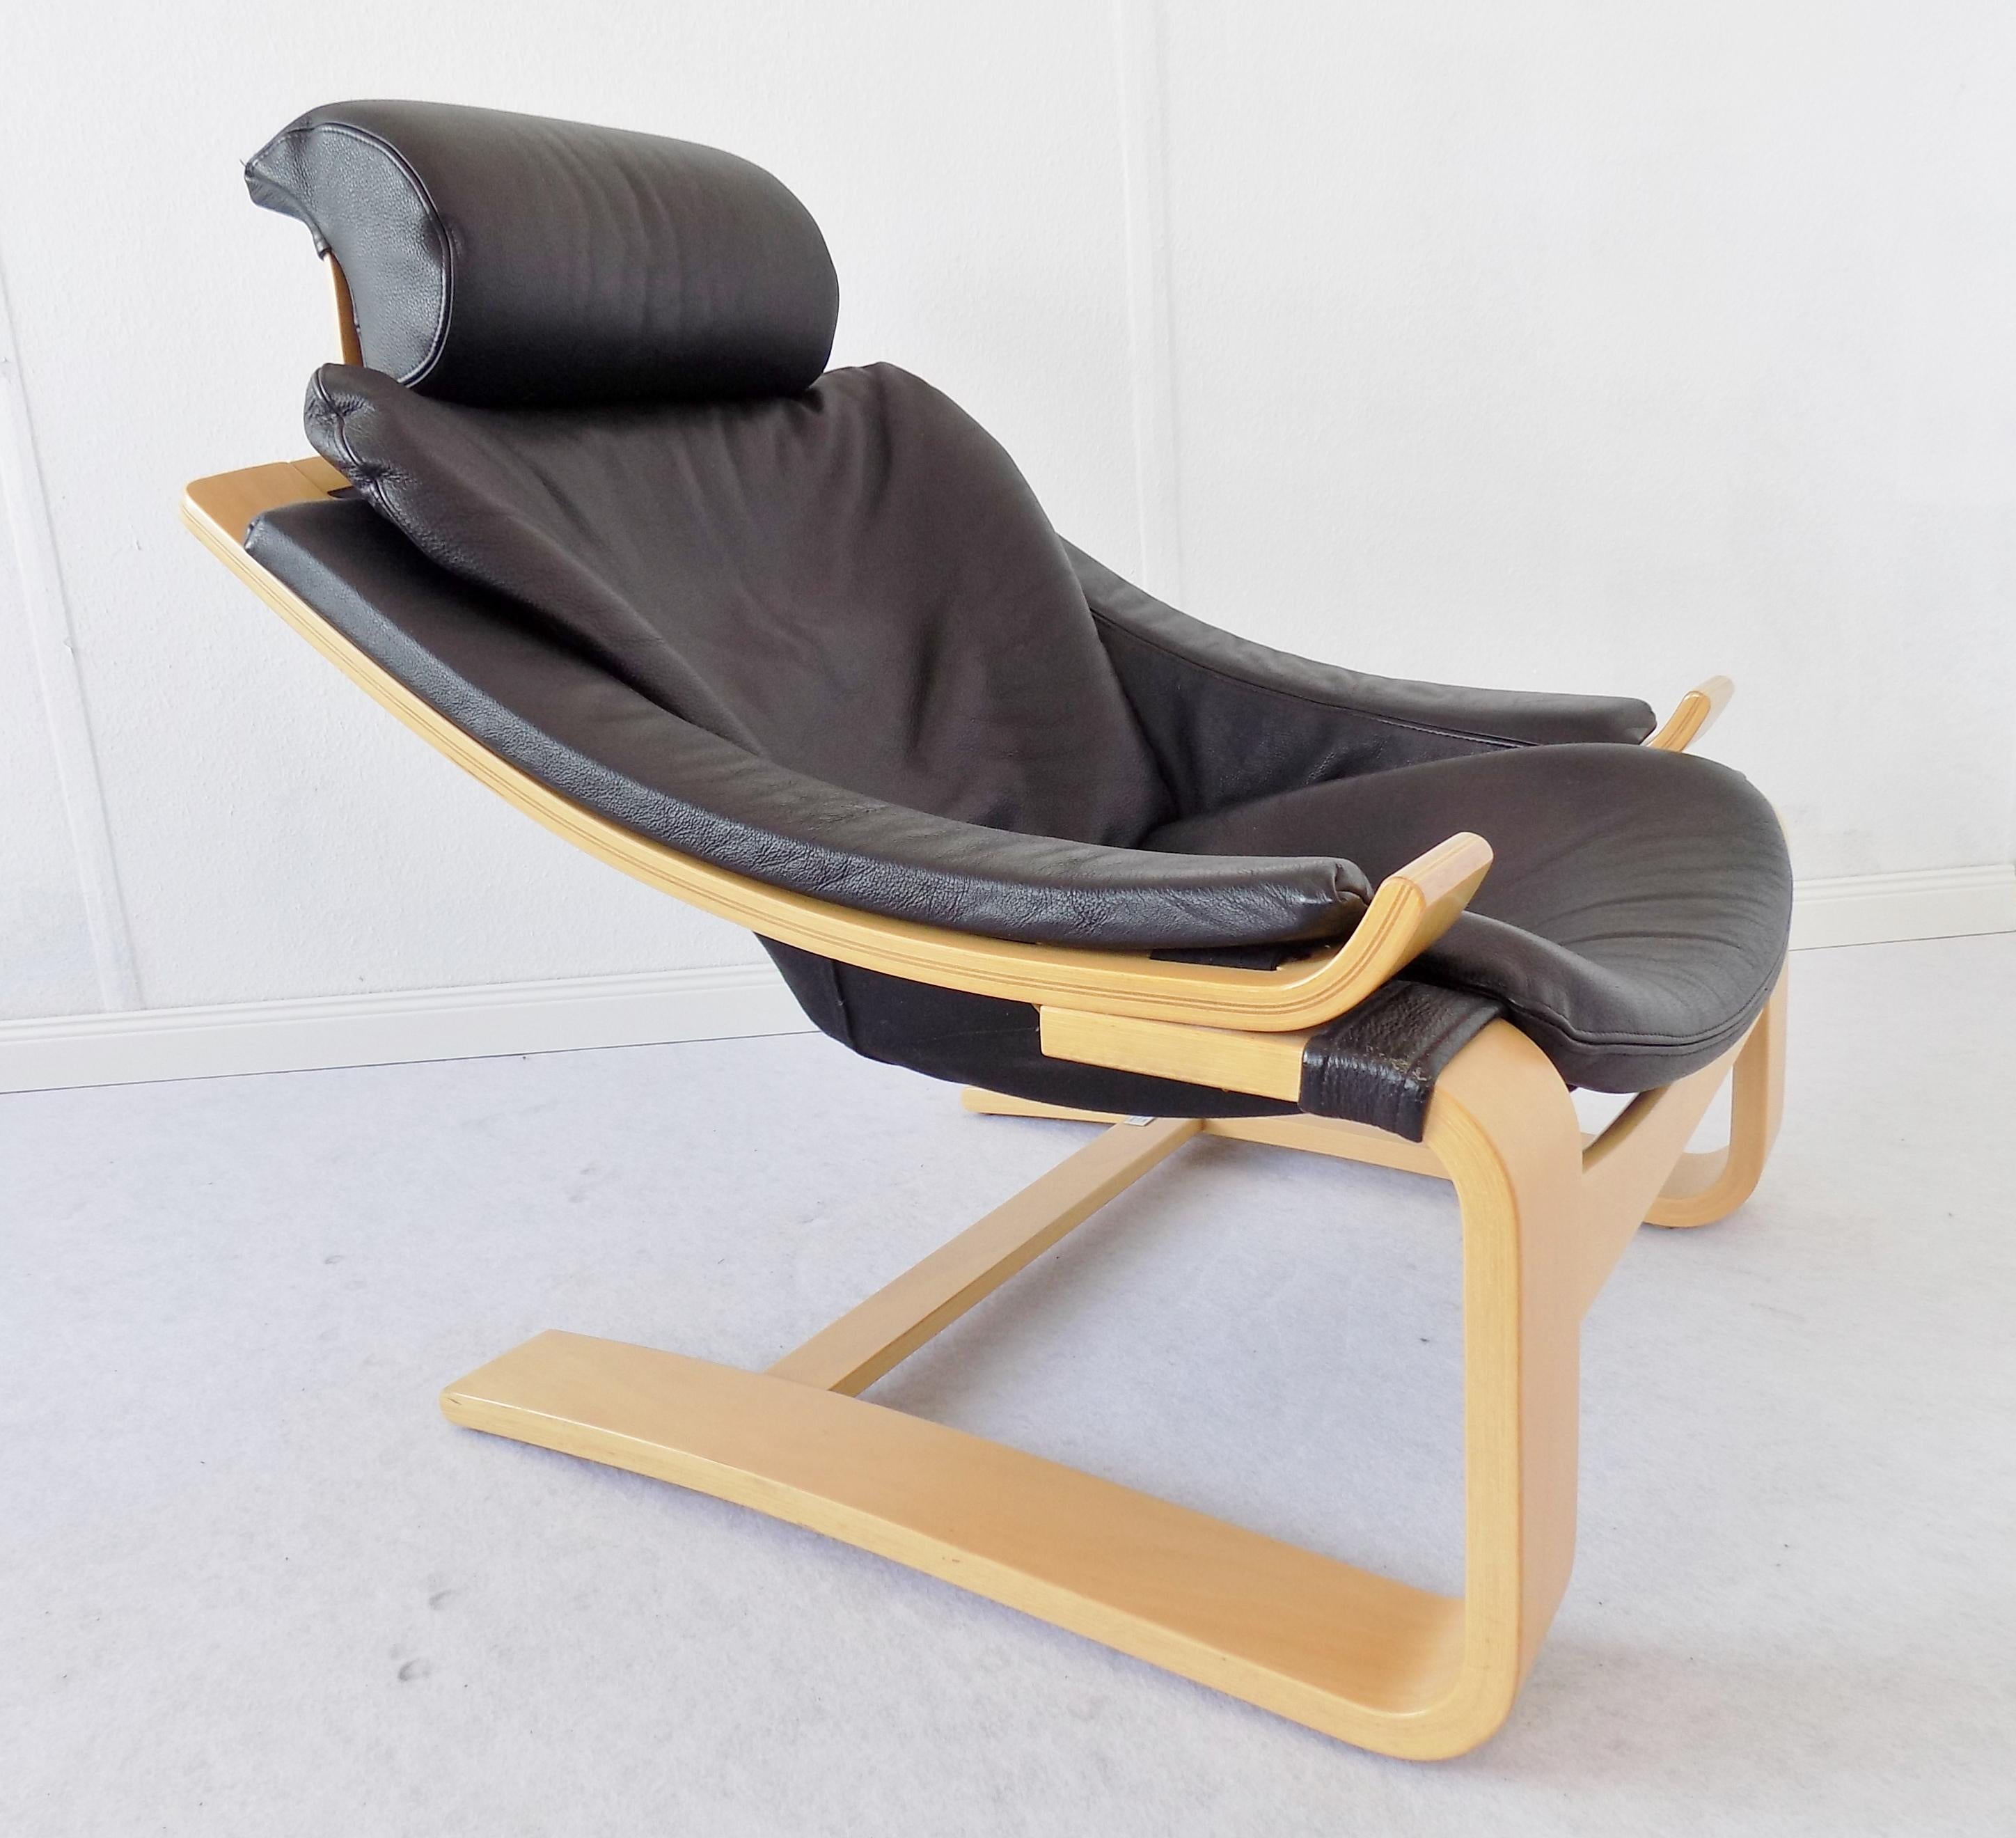 Famous lounge chair made by Nelo Kroken and designed by Ake Fribyter in the 1970s. This Kroken chair has the n° 59 of a limited edition of 250 chairs launched for the 25th anniversary. The chair is in excellent condition and comes with the